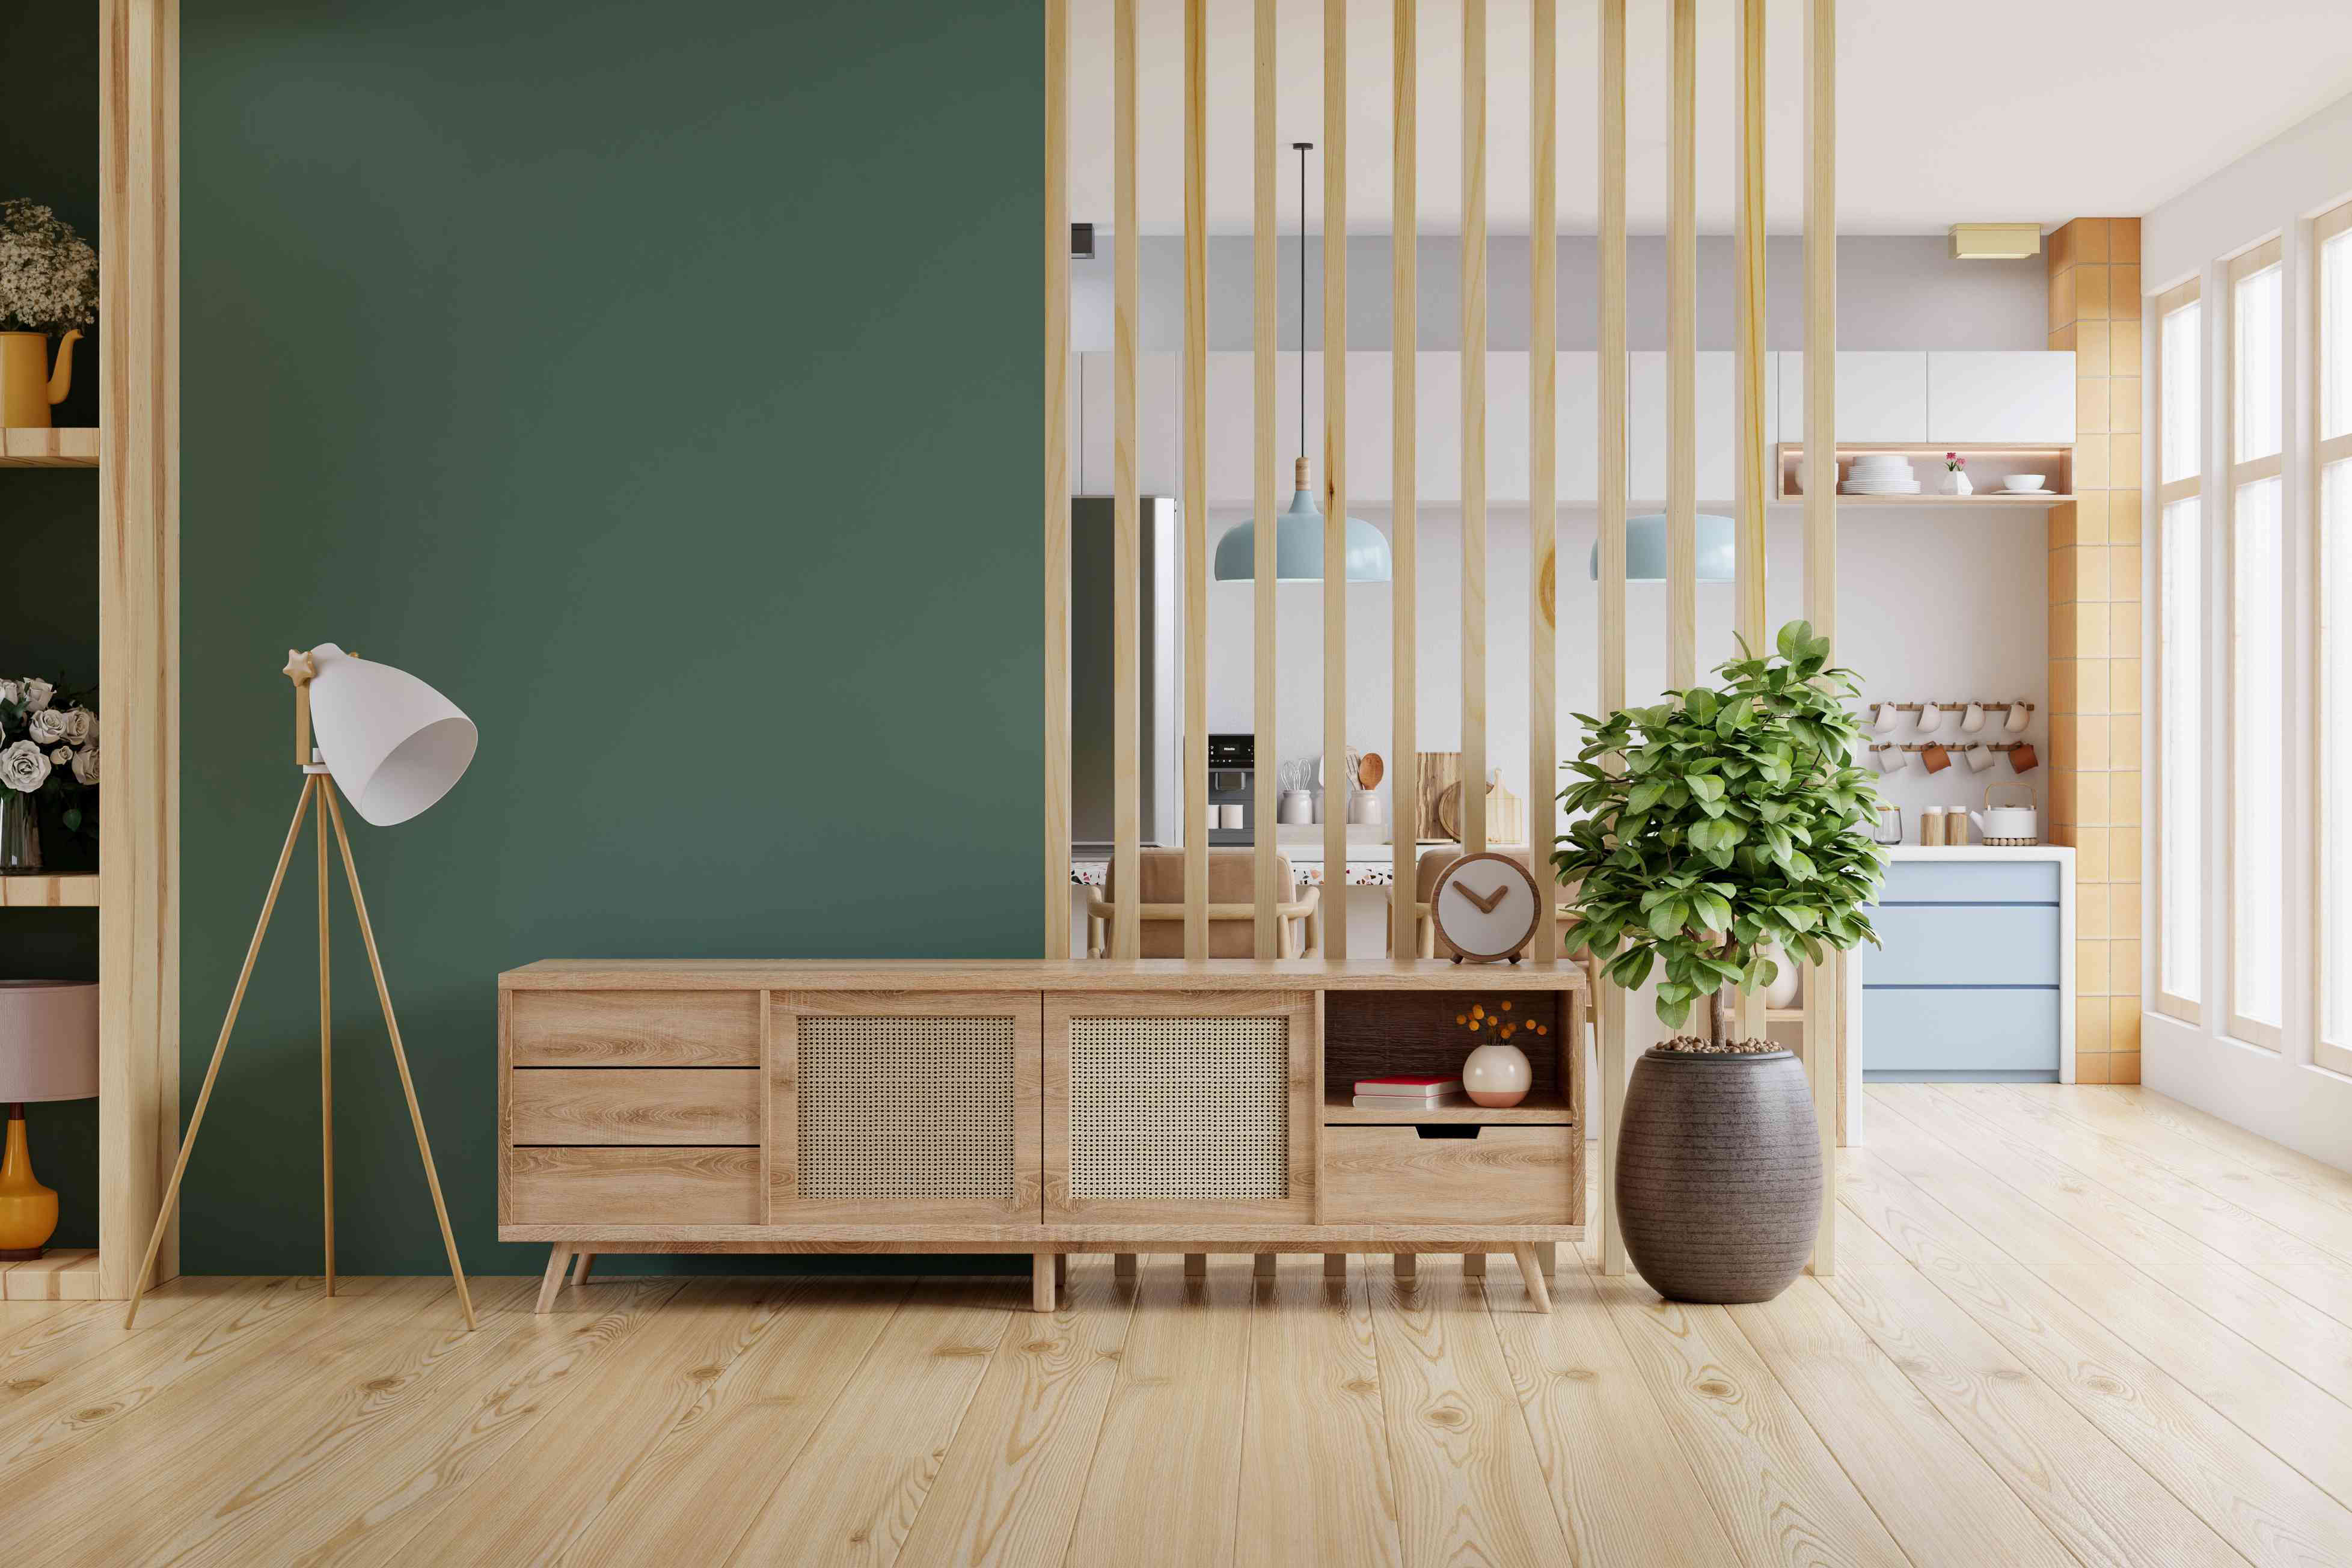 20 Clever Room Divider Ideas That Will Max Out Your Room’s Functionality